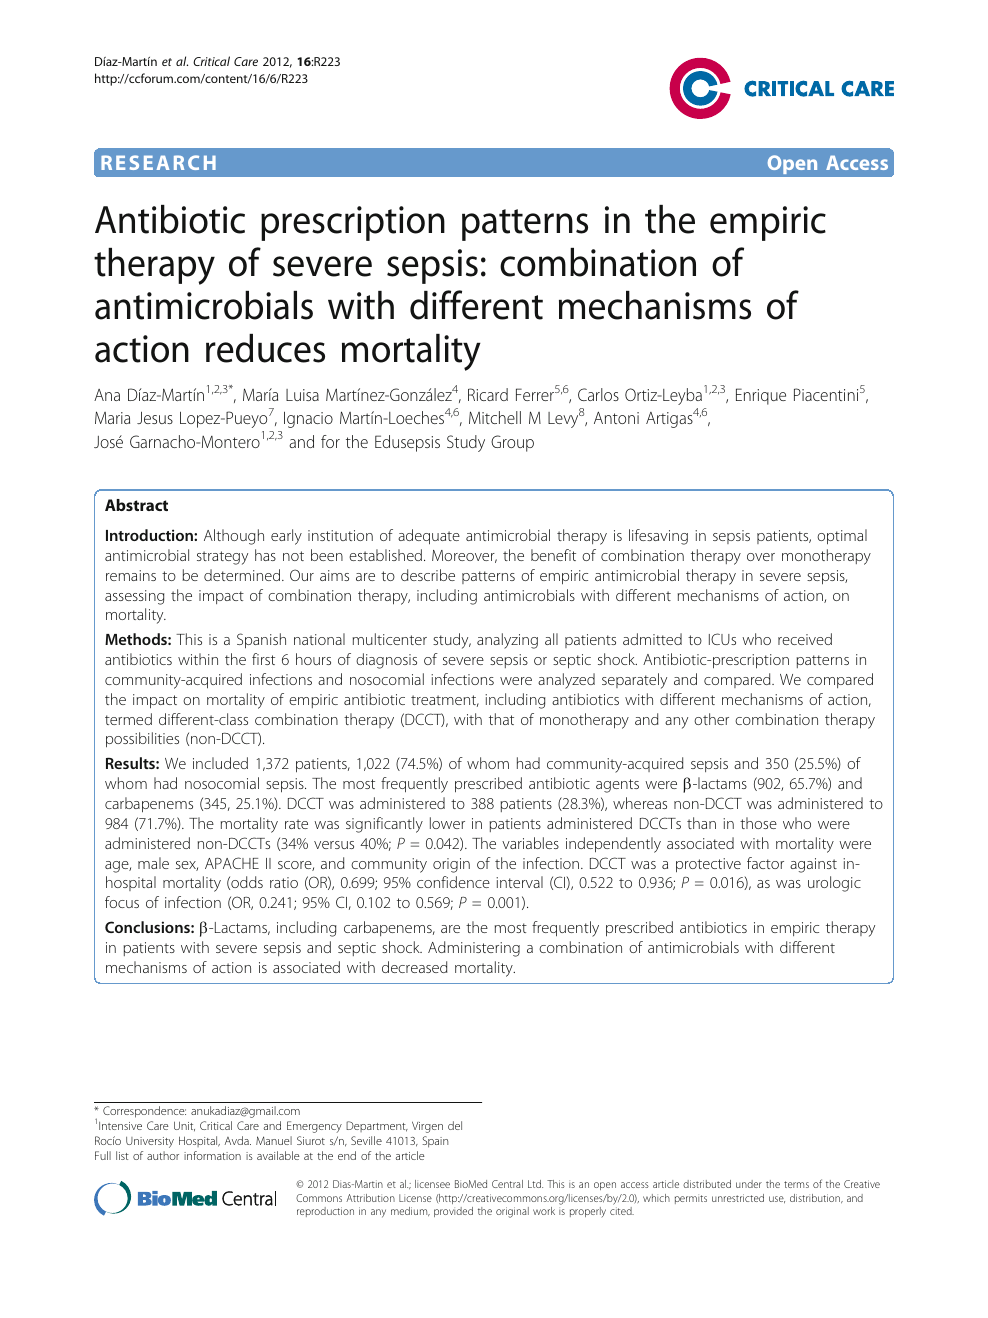 Antibiotic Prescription Patterns In The Empiric Therapy Of Severe Sepsis Combination Of Antimicrobials With Different Mechanisms Of Action Reduces Mortality Topic Of Research Paper In Clinical Medicine Download Scholarly Article Pdf